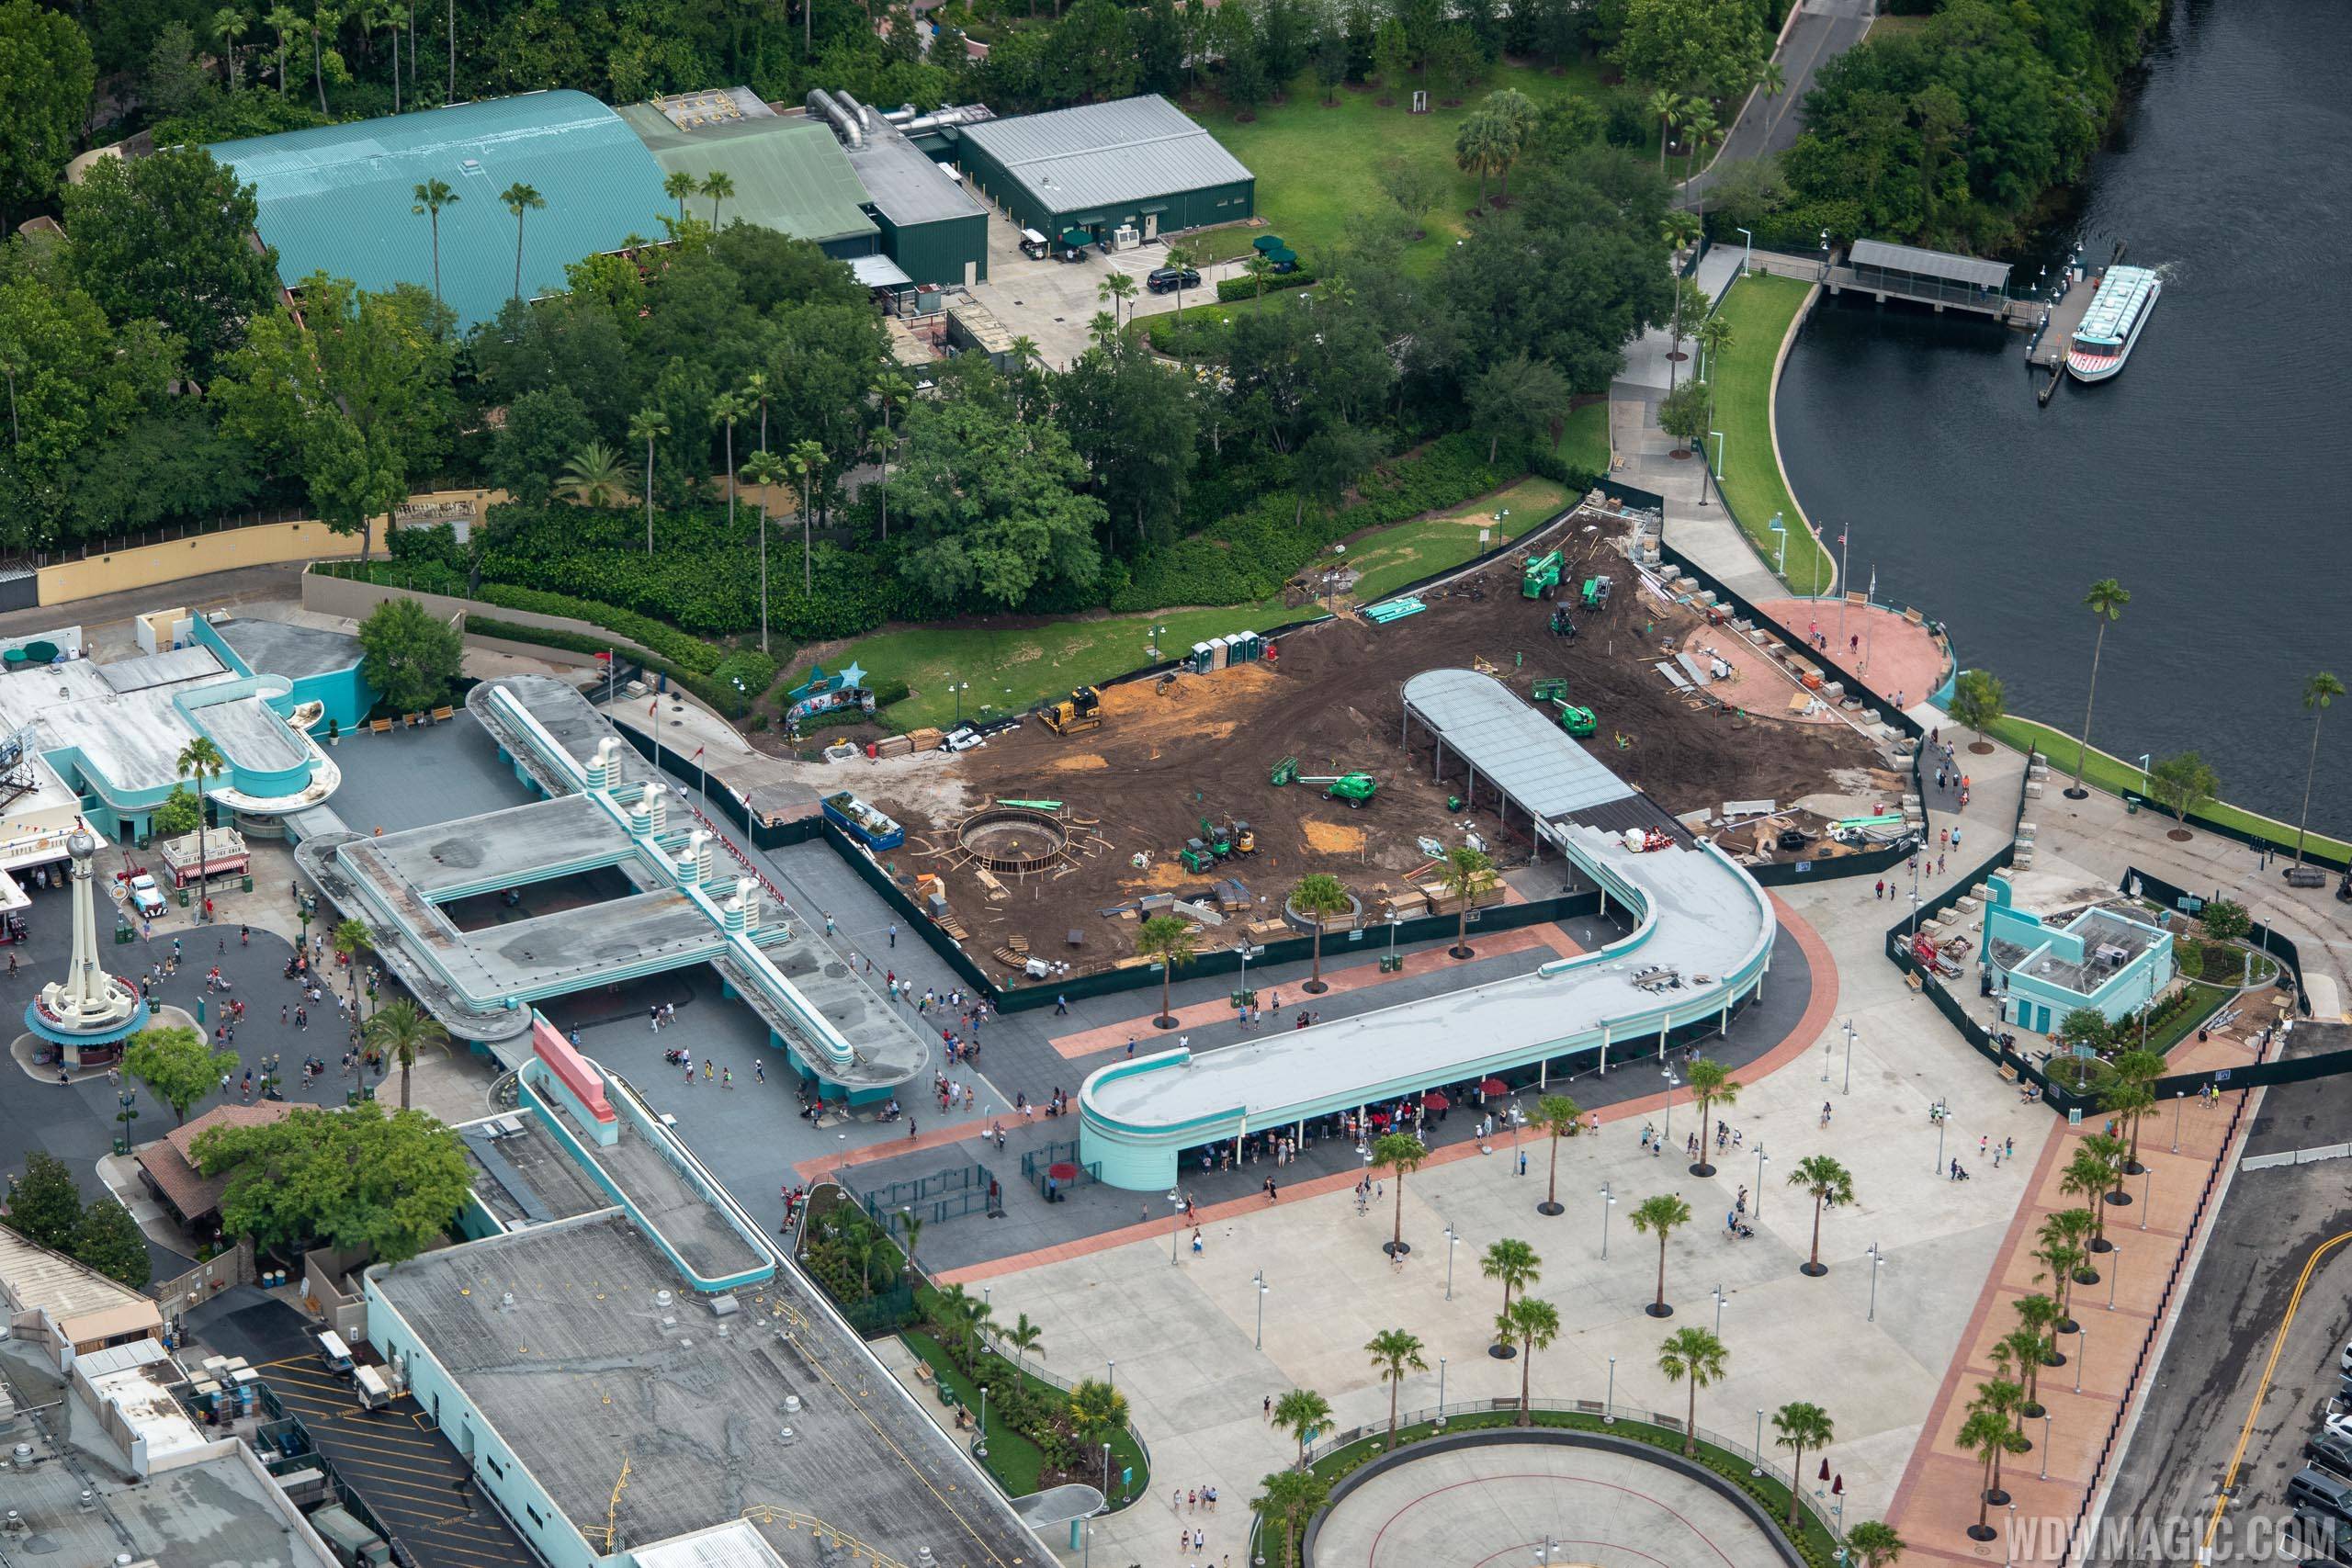 Main entrance construction from the air - June 2019